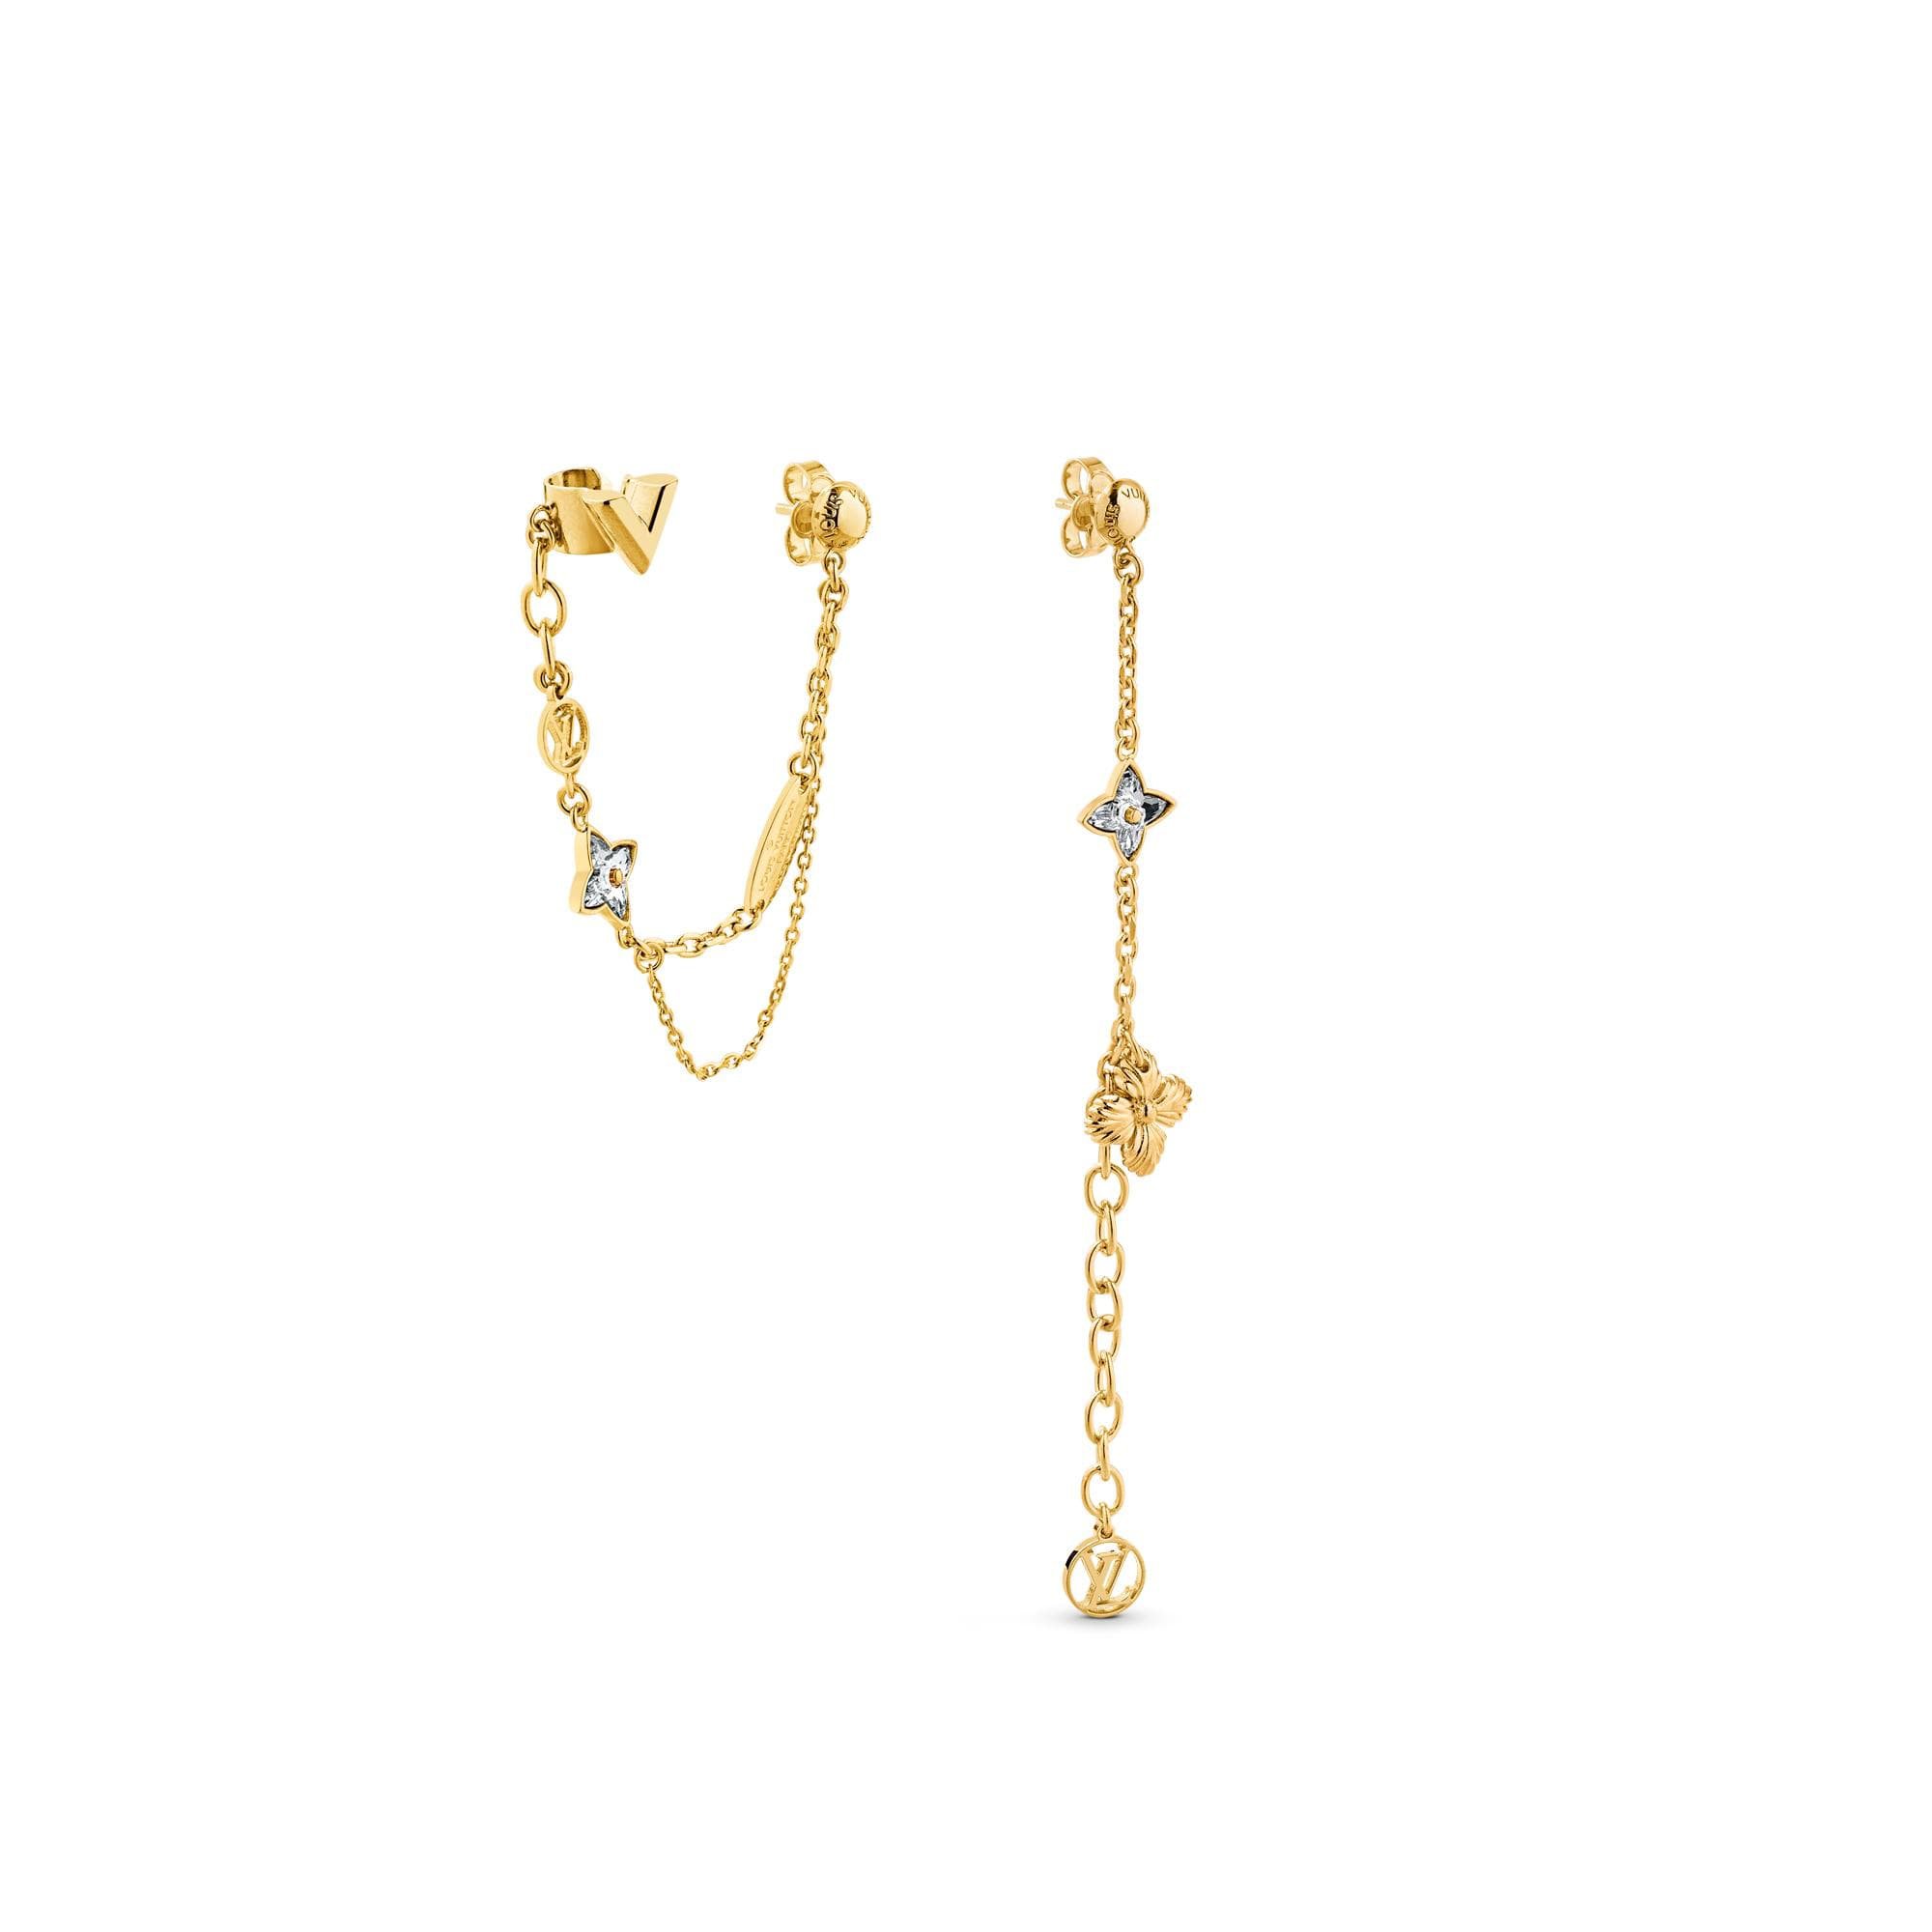 Louis Vuitton Blooming Strass Mismatched Pendant Earrings - Accessories, LOUIS VUITTON ®